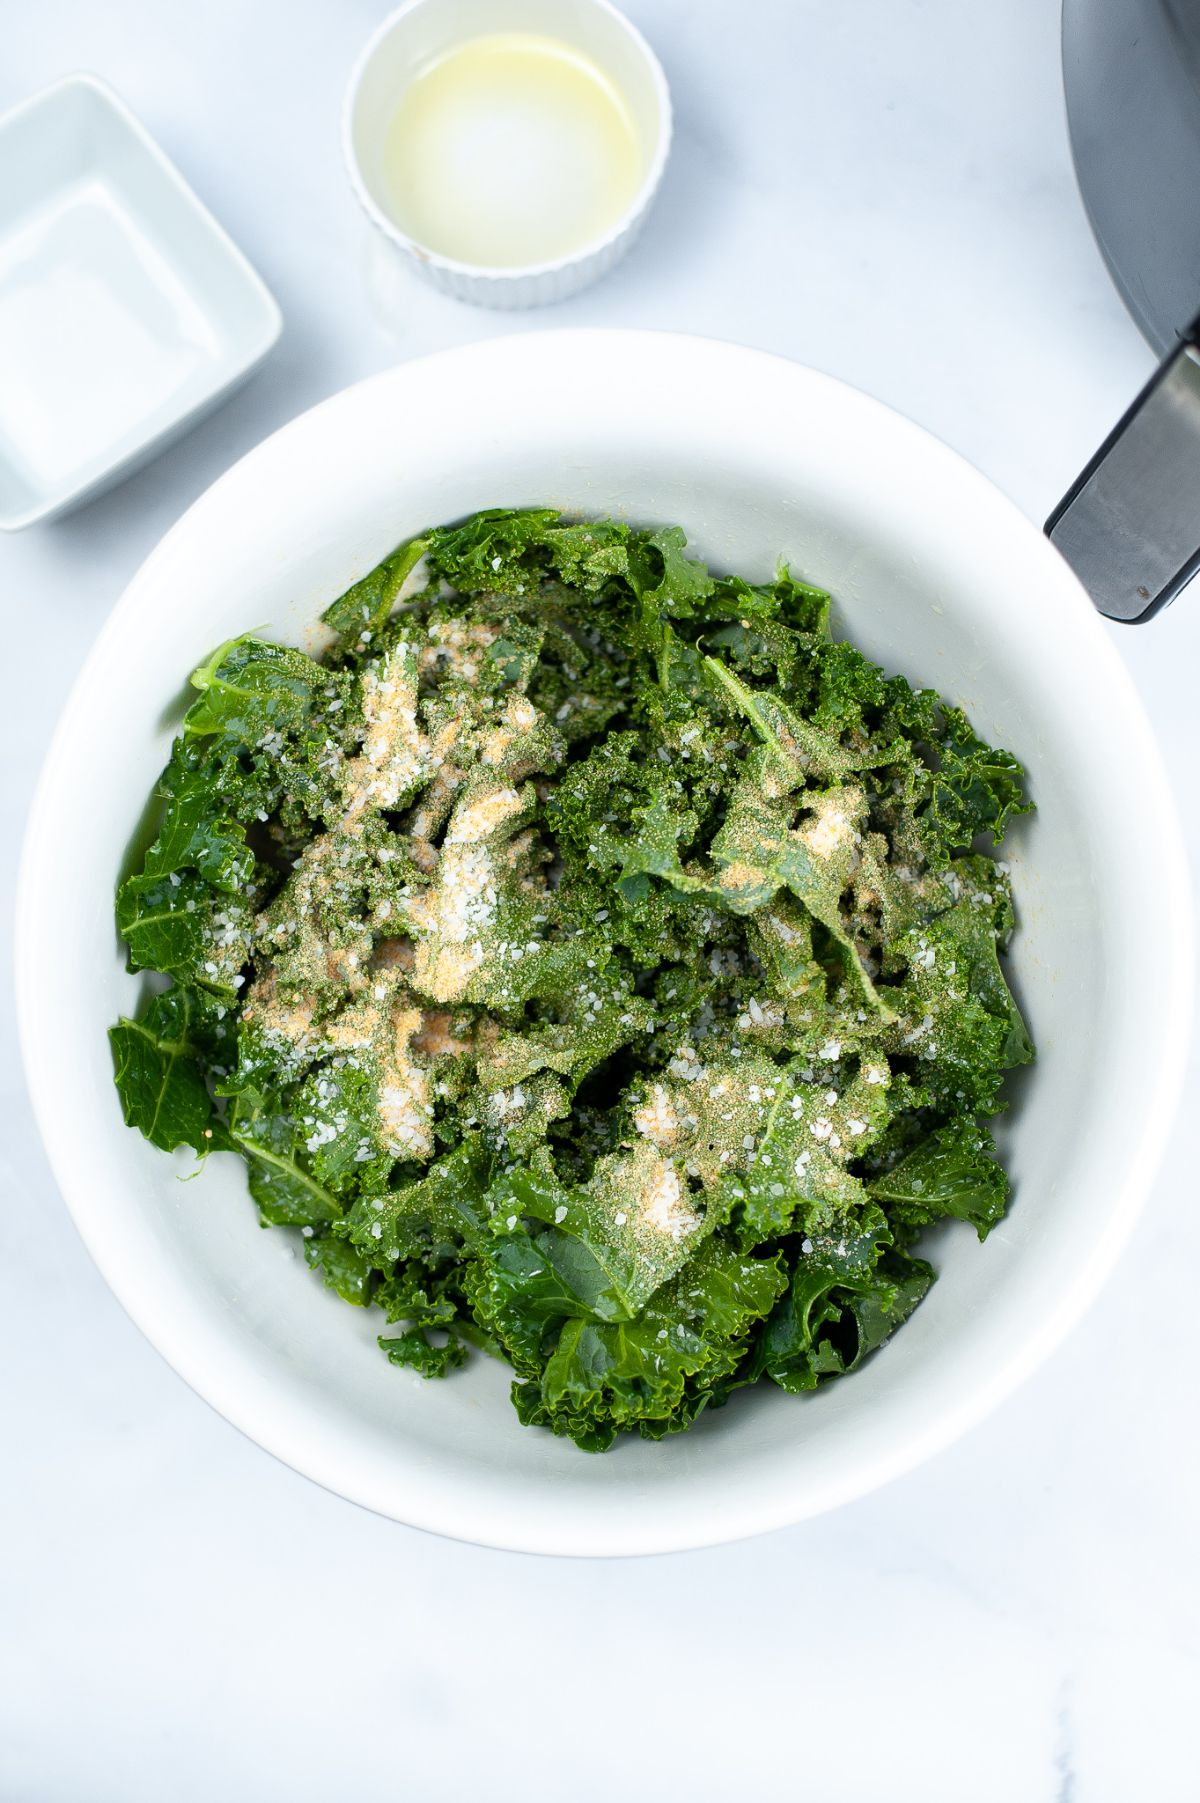 Kale leaves in a bowl seasoned with garlic powder and salt.